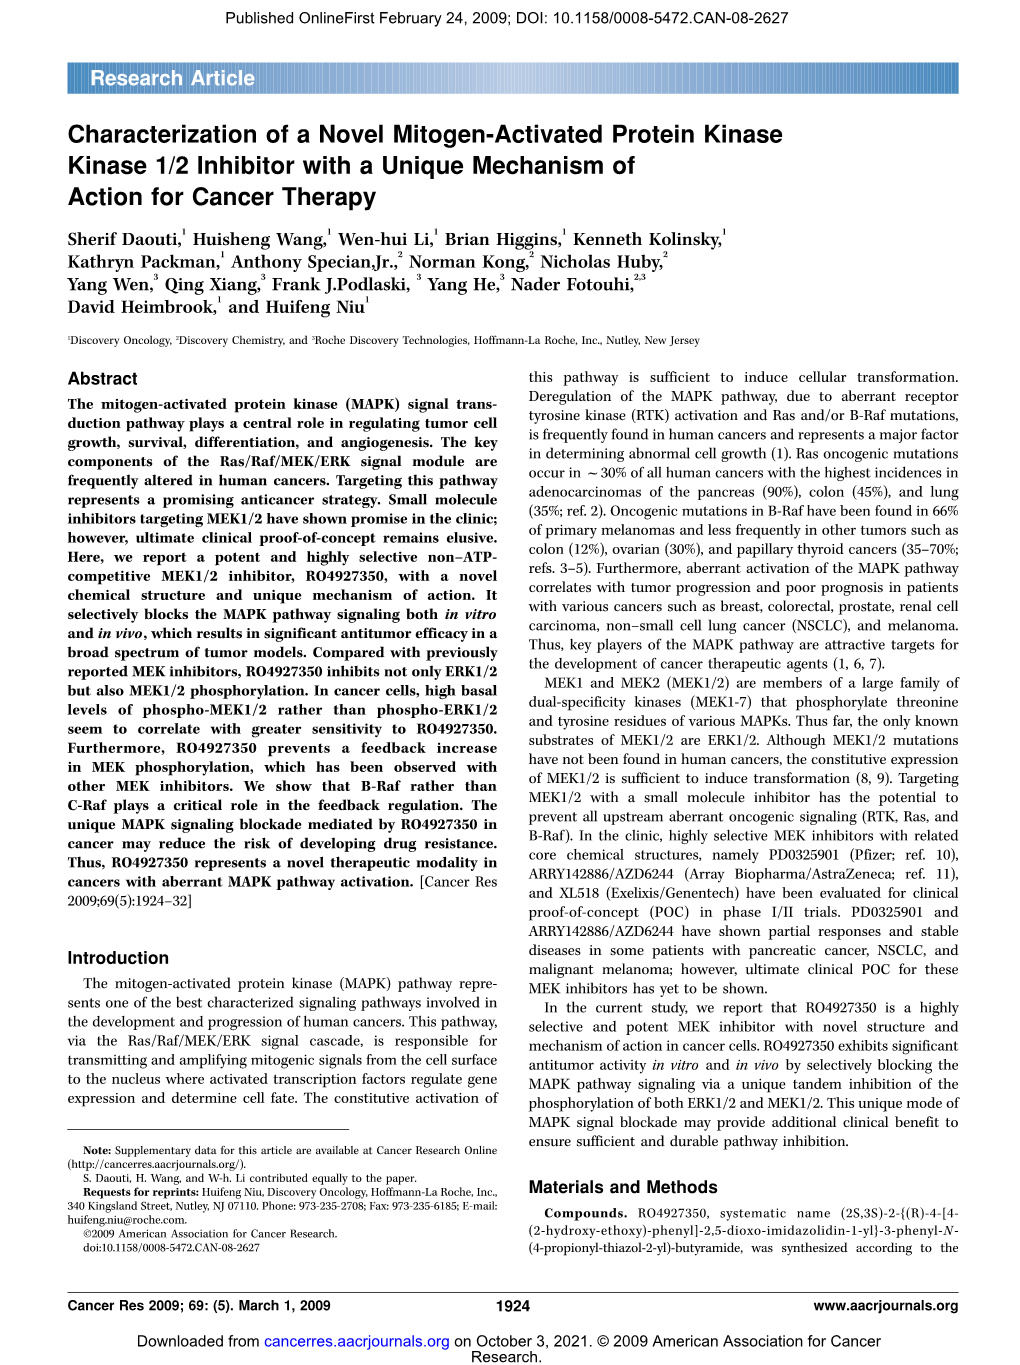 Characterization of a Novel Mitogen-Activated Protein Kinase Kinase 1/2 Inhibitor with a Unique Mechanism of Action for Cancer Therapy